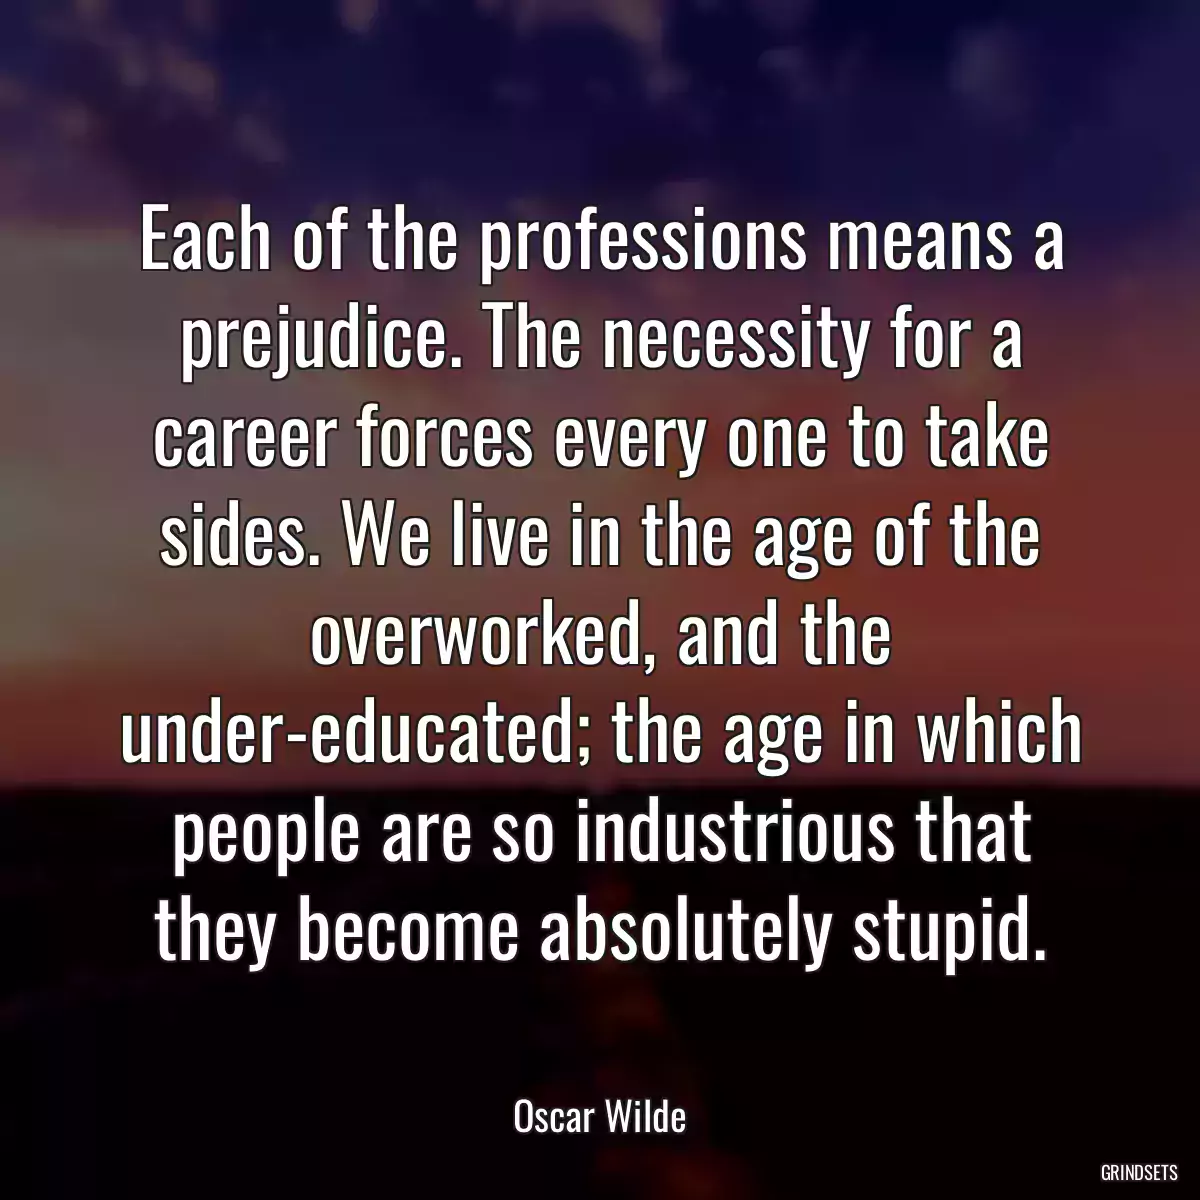 Each of the professions means a prejudice. The necessity for a career forces every one to take sides. We live in the age of the overworked, and the under-educated; the age in which people are so industrious that they become absolutely stupid.